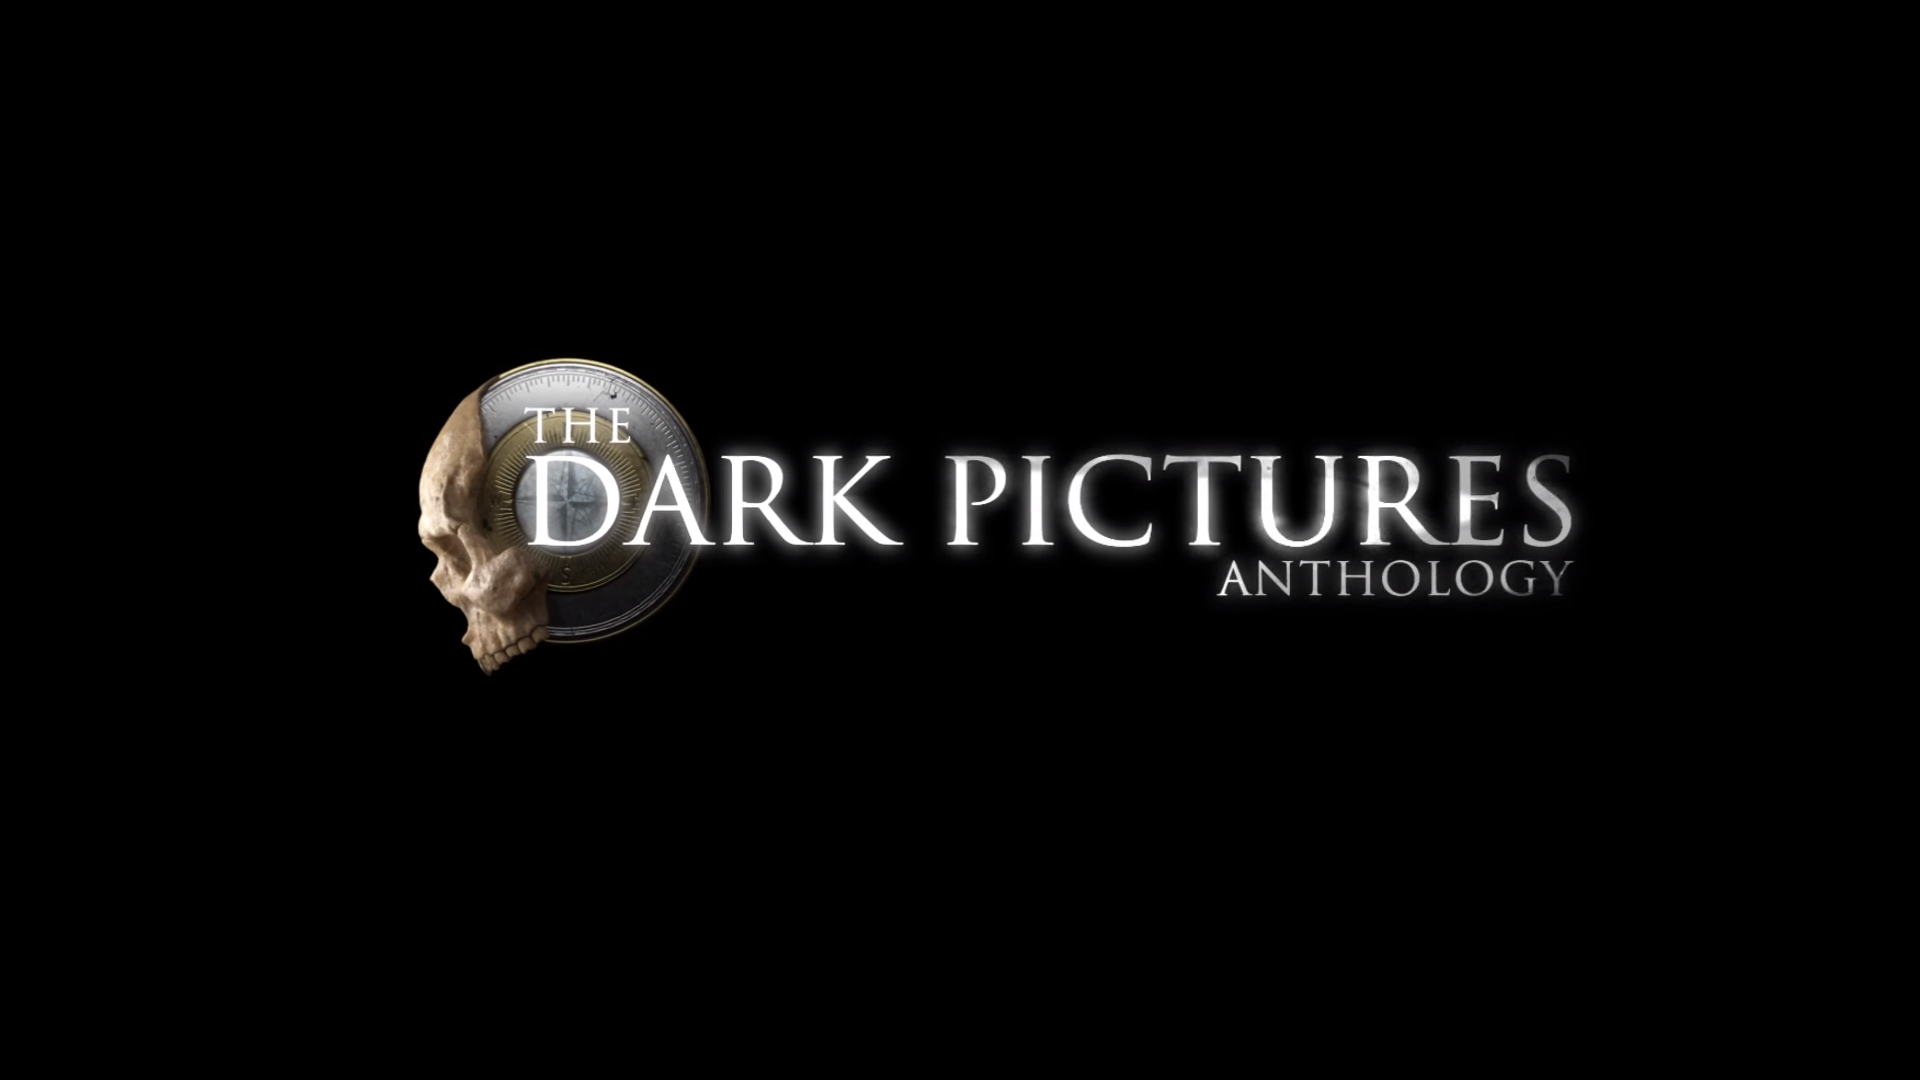 download free the dark pictures anthology the devil in me